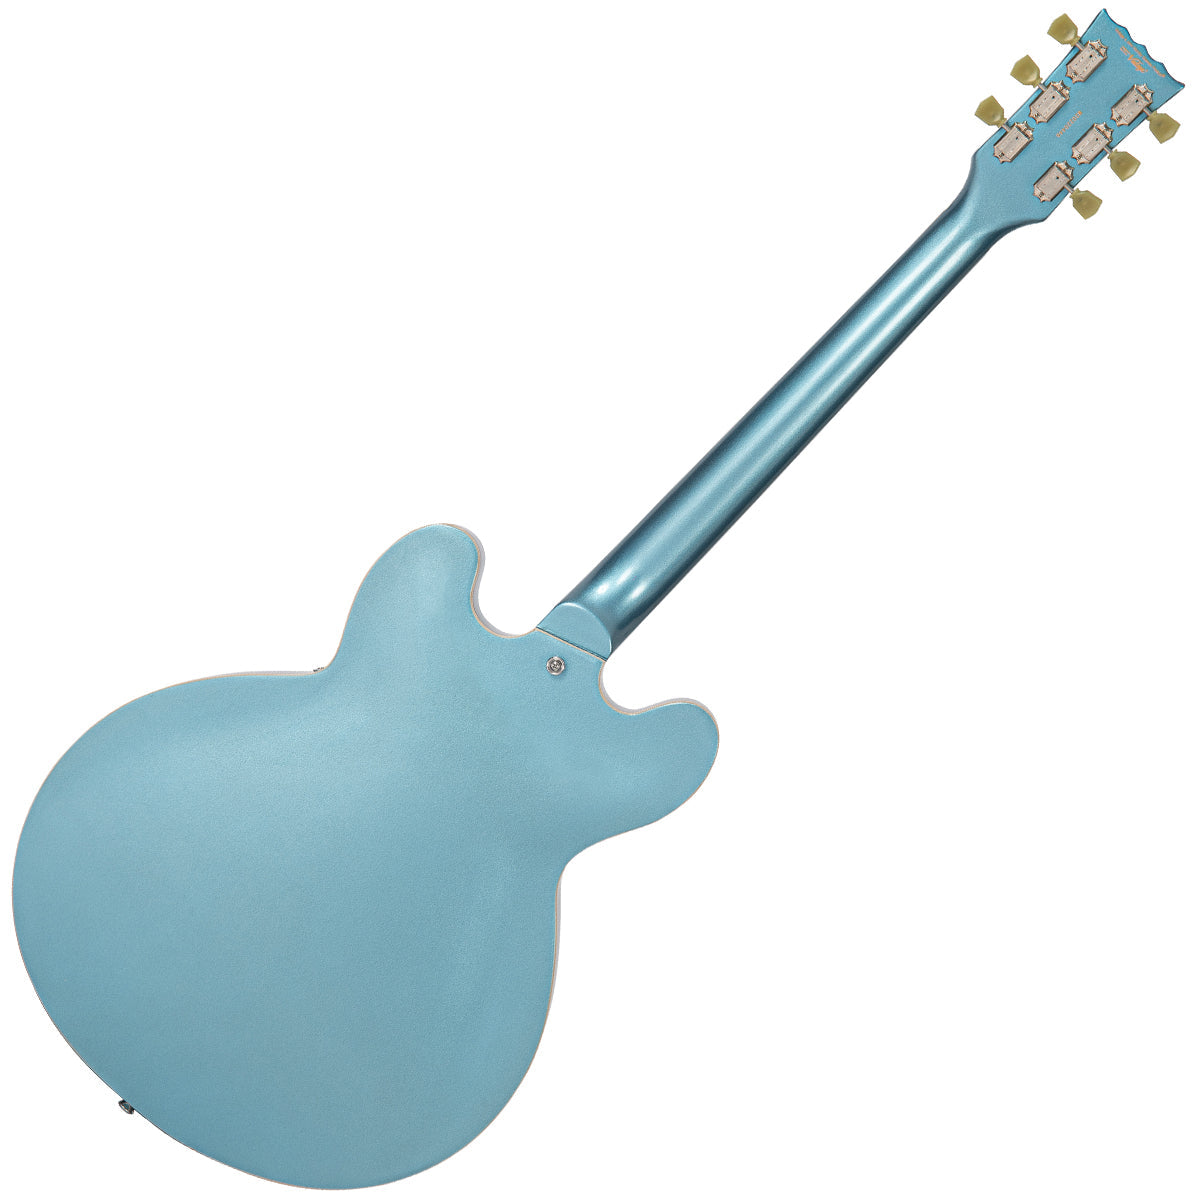 Vintage VSA500B ReIssued Semi Acoustic Guitar w/Bigsby ~ Gun Hill Blue, Electric Guitar for sale at Richards Guitars.